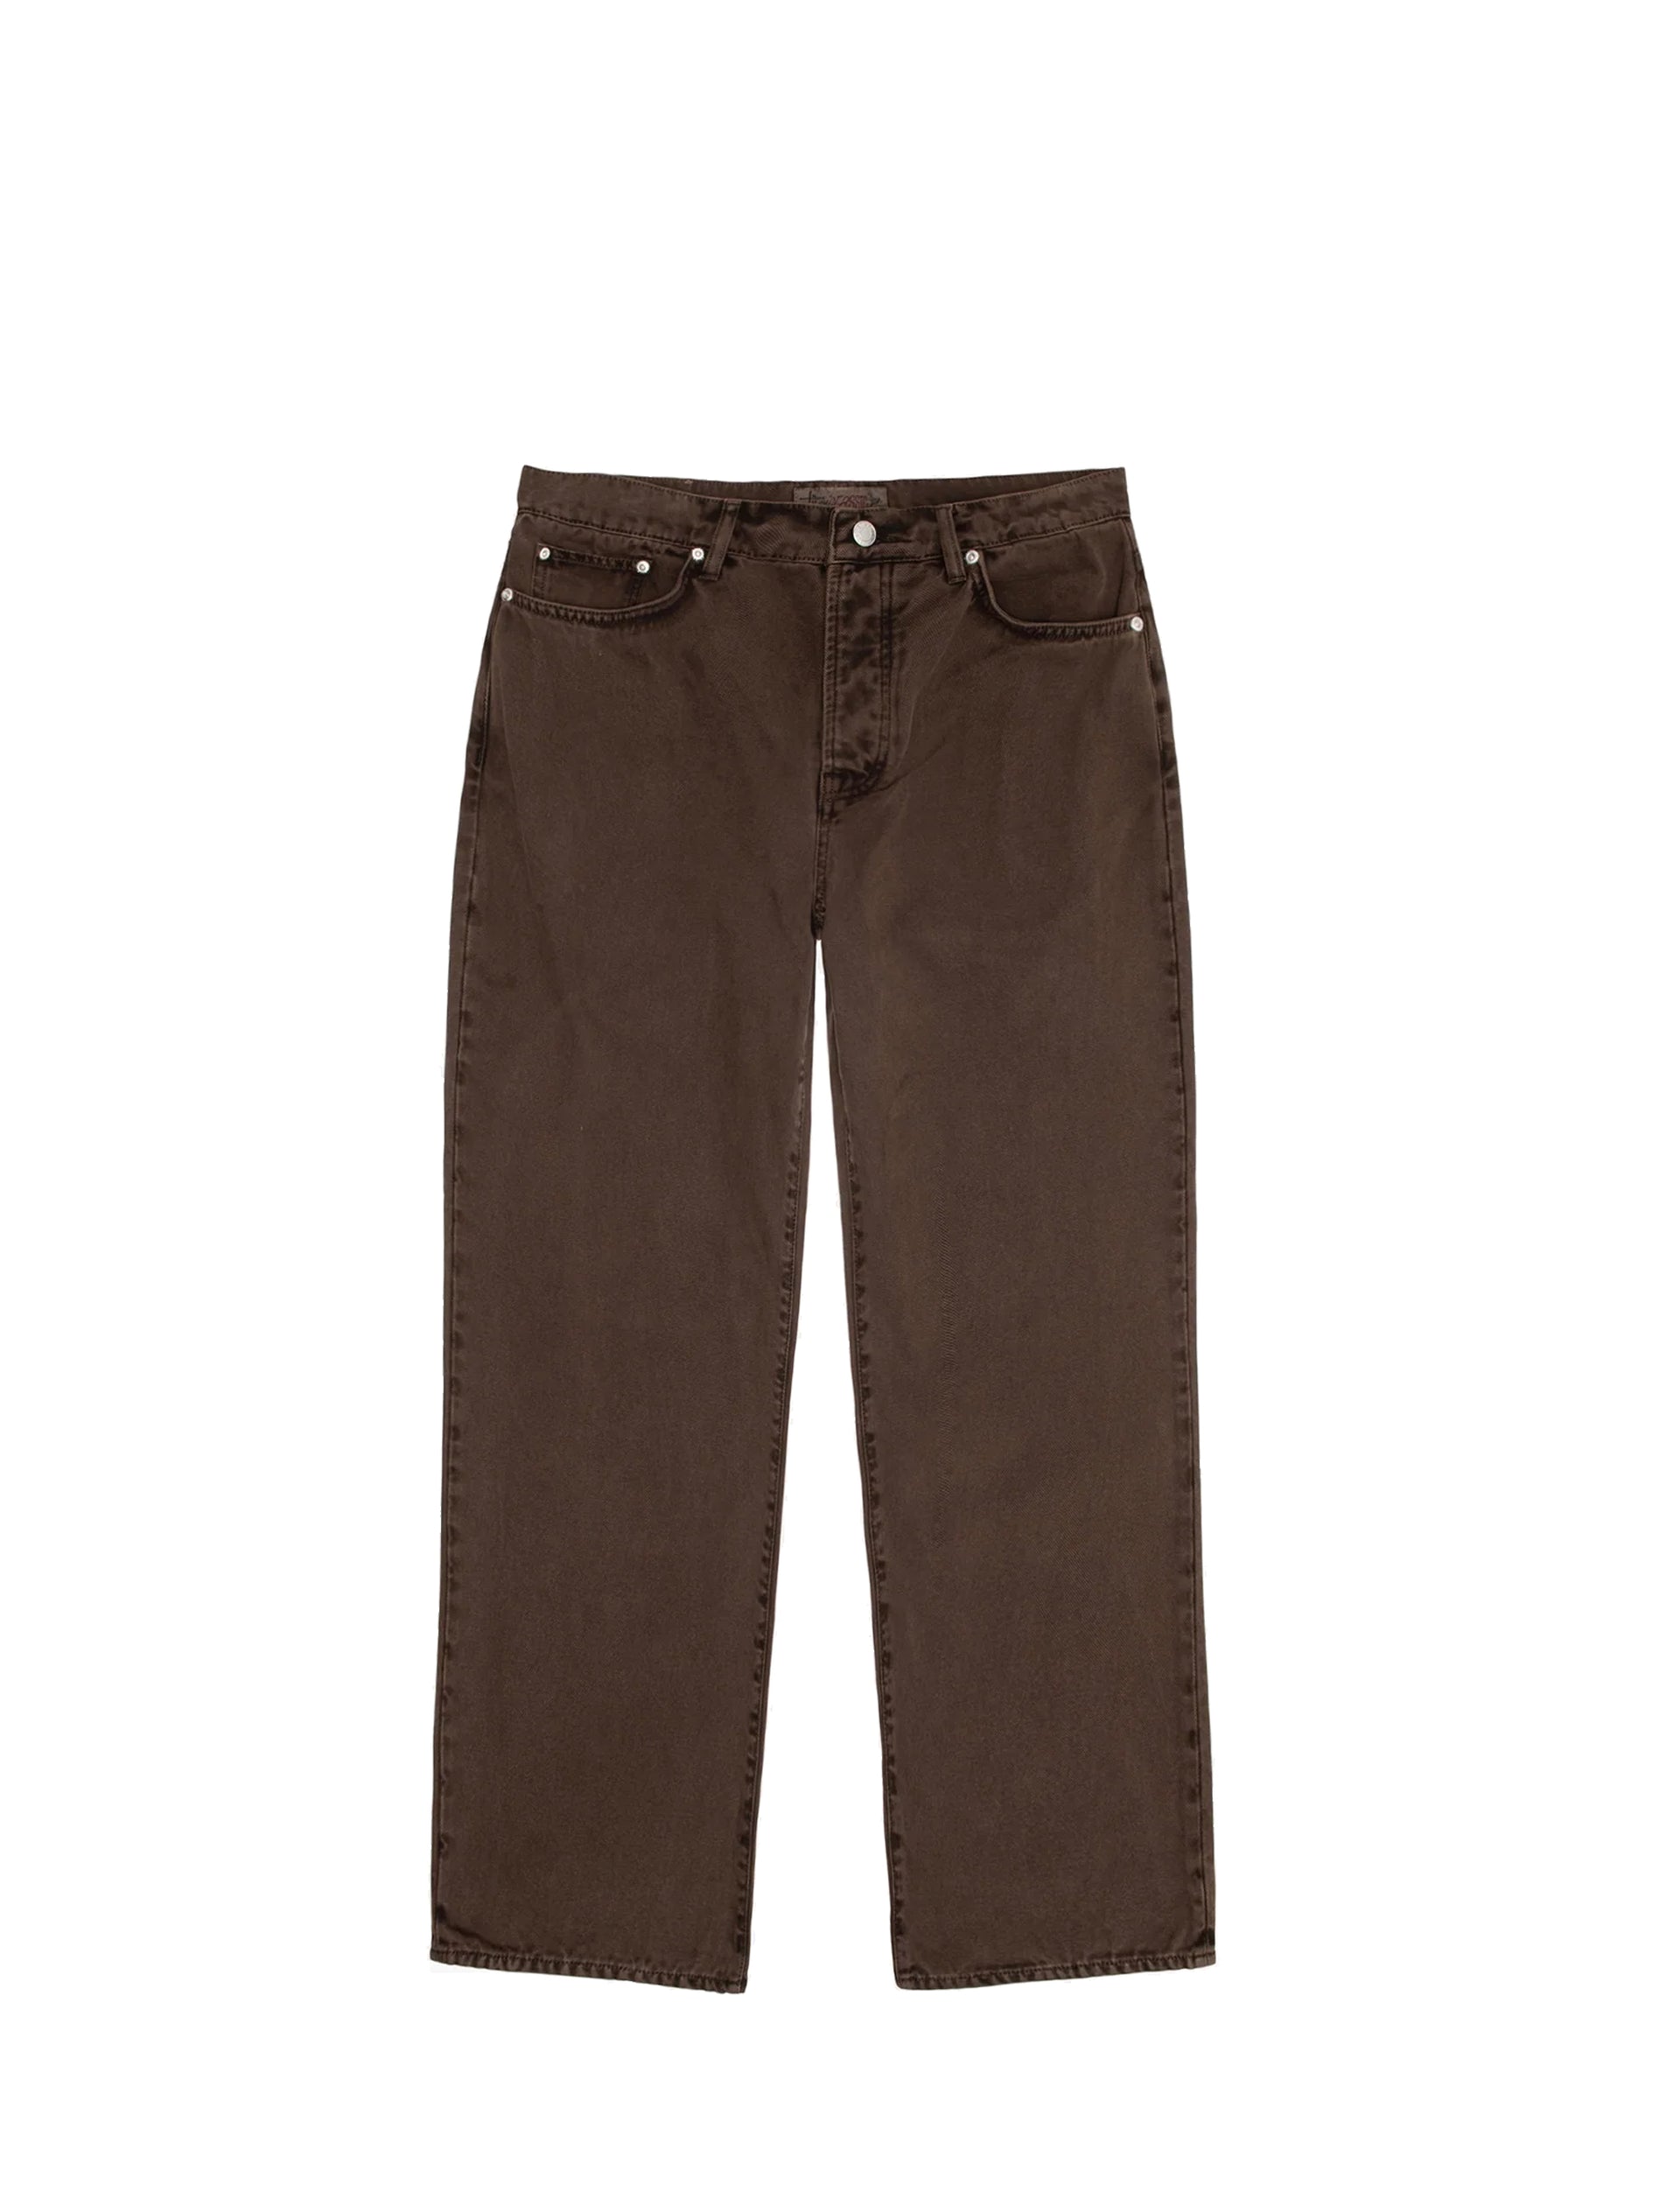 STÜSSY Classic Jeans Washed Canvas BROWN